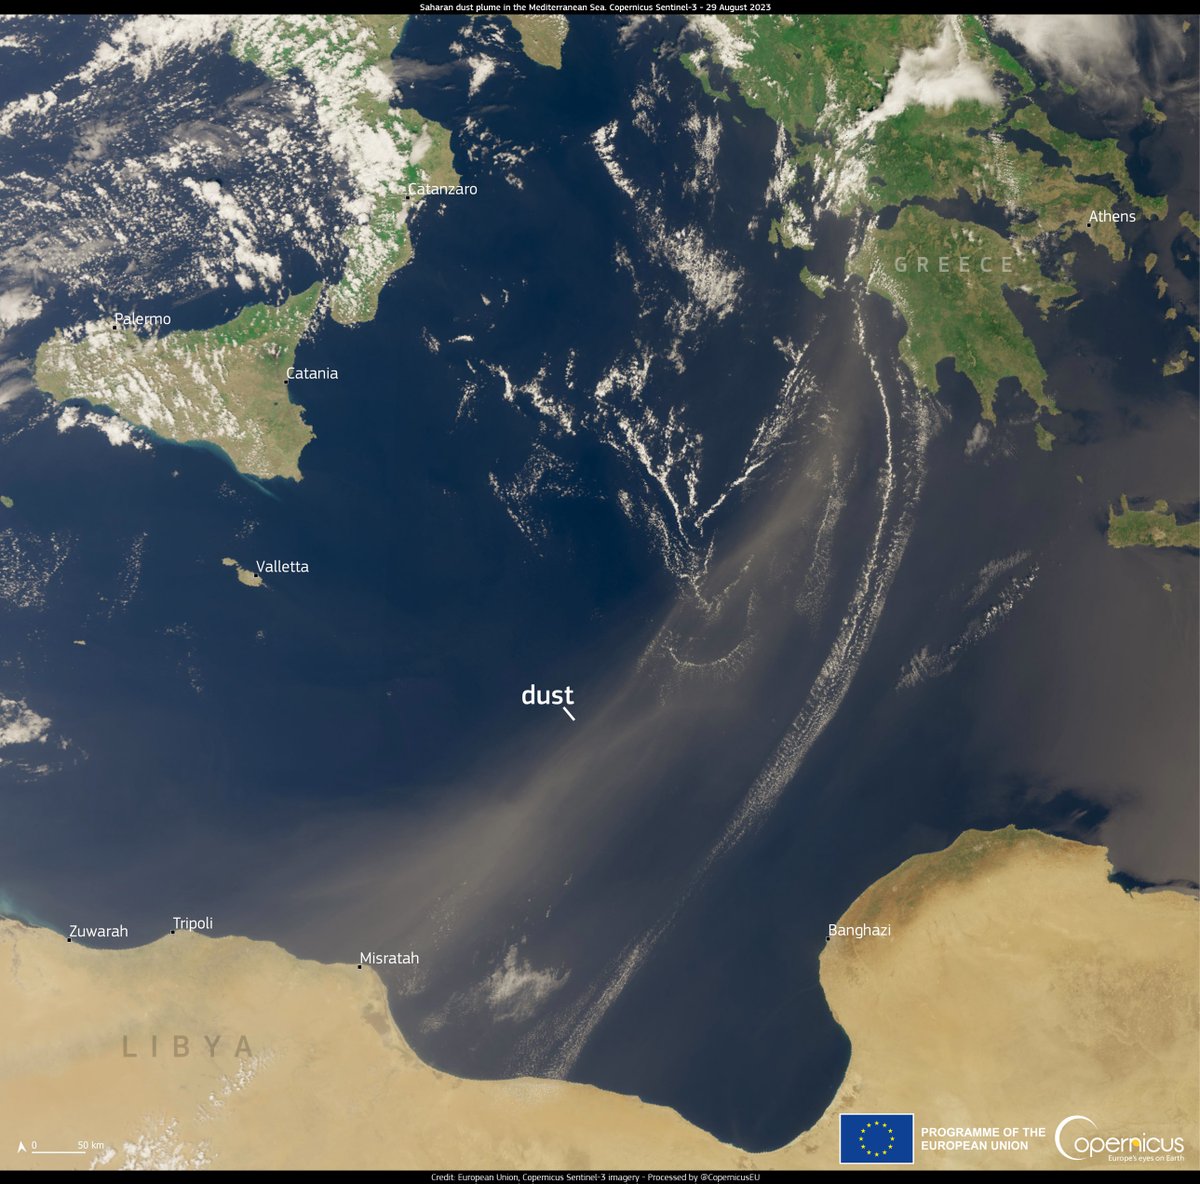 #ImageOfTheDay

Yet another #SaharanDust episode is ongoing in the Mediterranean Sea

The plume extends from the coast of Libya🇱🇾 to the southern coasts of Greece🇬🇷

⬇️On 29 August a #Copernicus #Sentinel3 🇪🇺🛰️ captured the dust plume drifting in the eastern Mediterranean